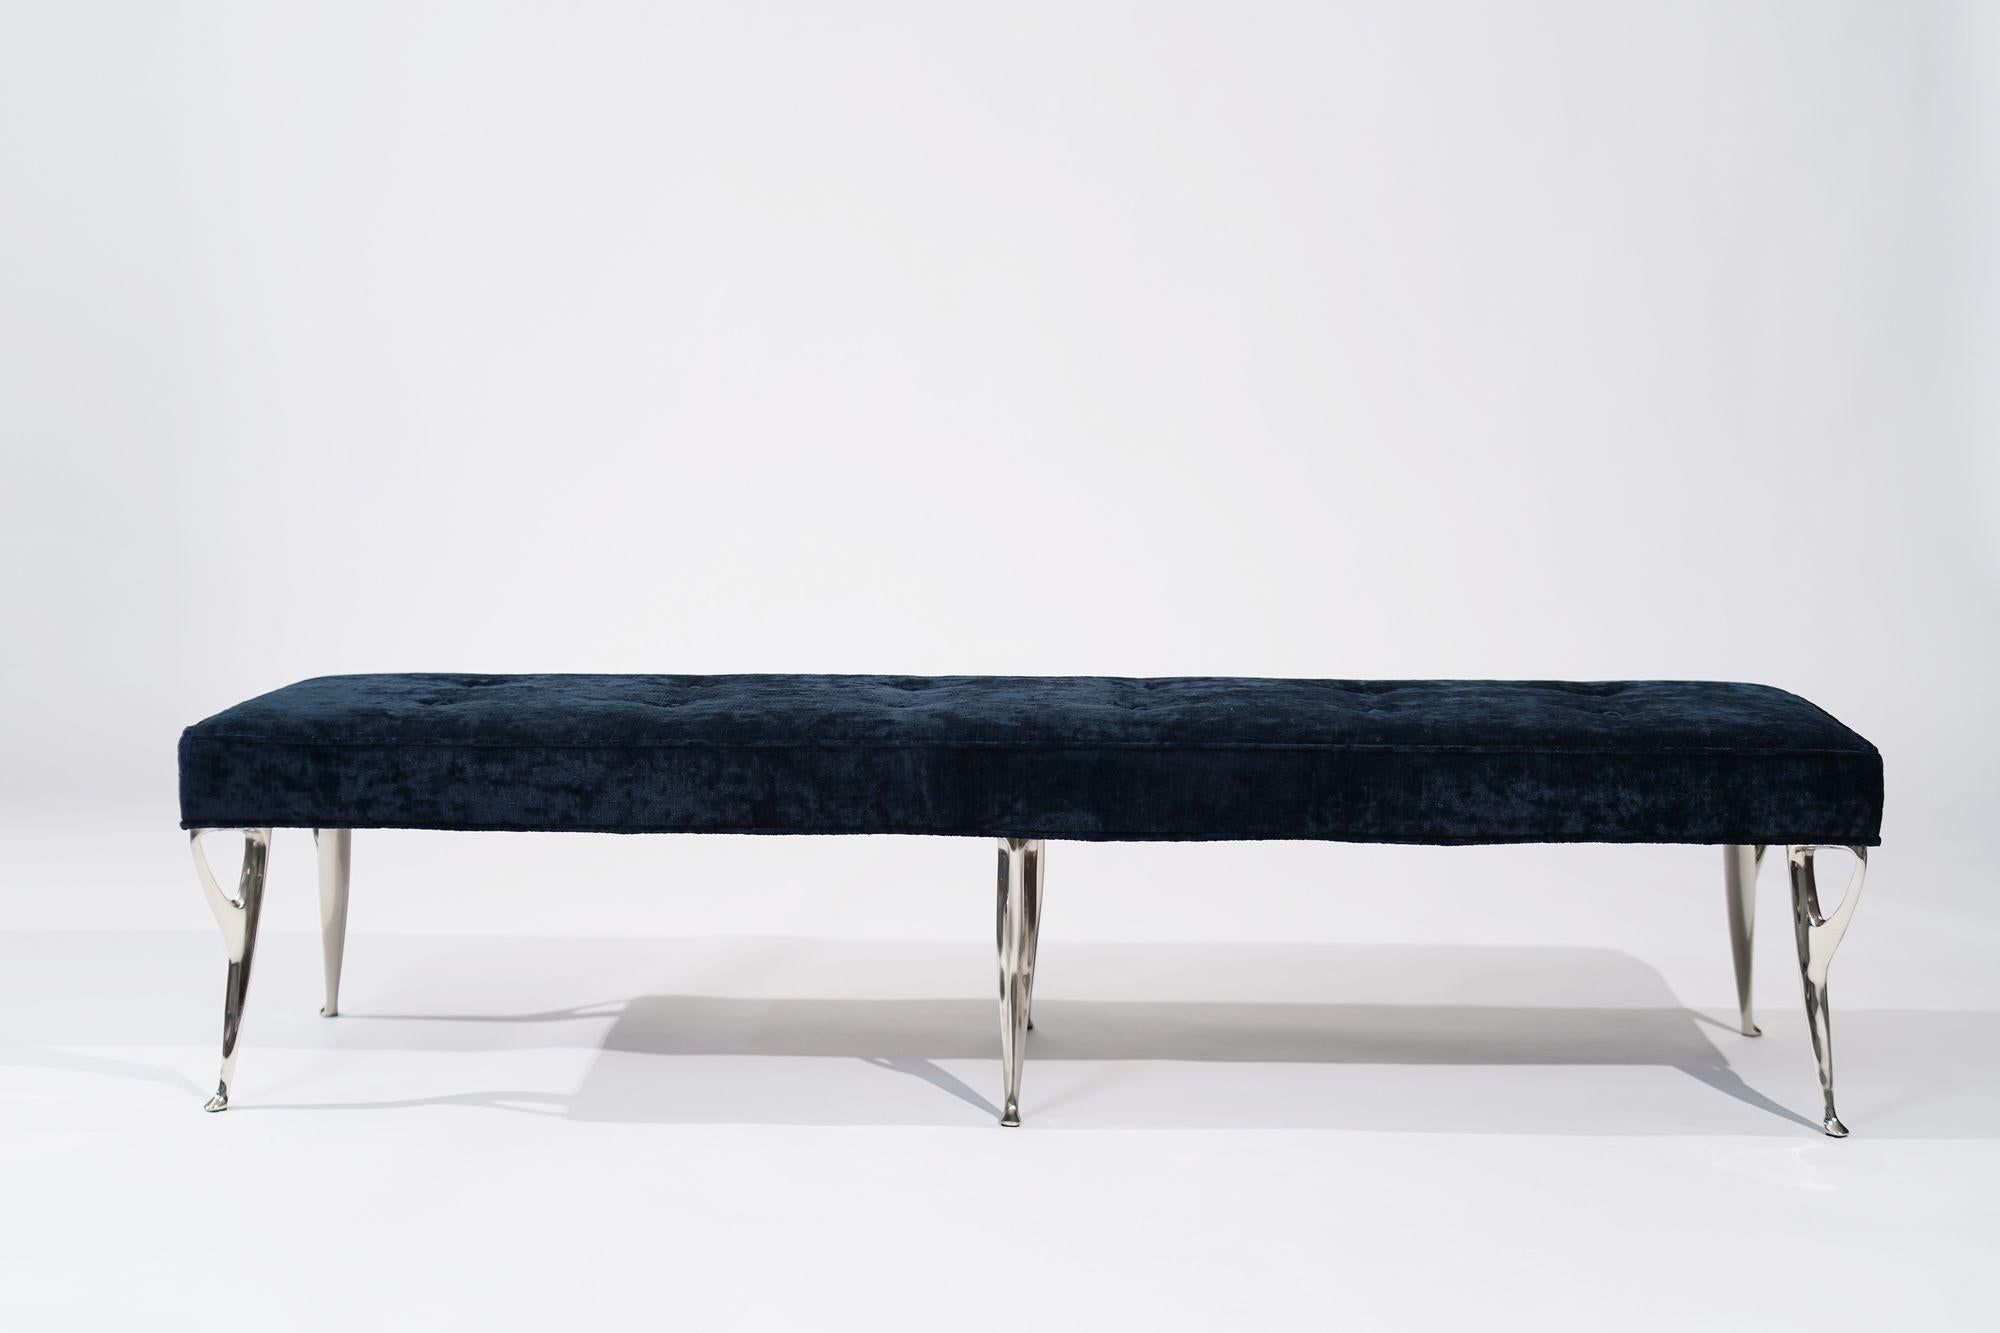 Mid-Century Italian Bench, an exquisite piece hailing from the 1950s, meticulously restored by Stamford Modern. Reimagined in sumptuous navy blue chenille upholstery, the bench exudes opulence and sophistication. The sculptural nickel legs, expertly